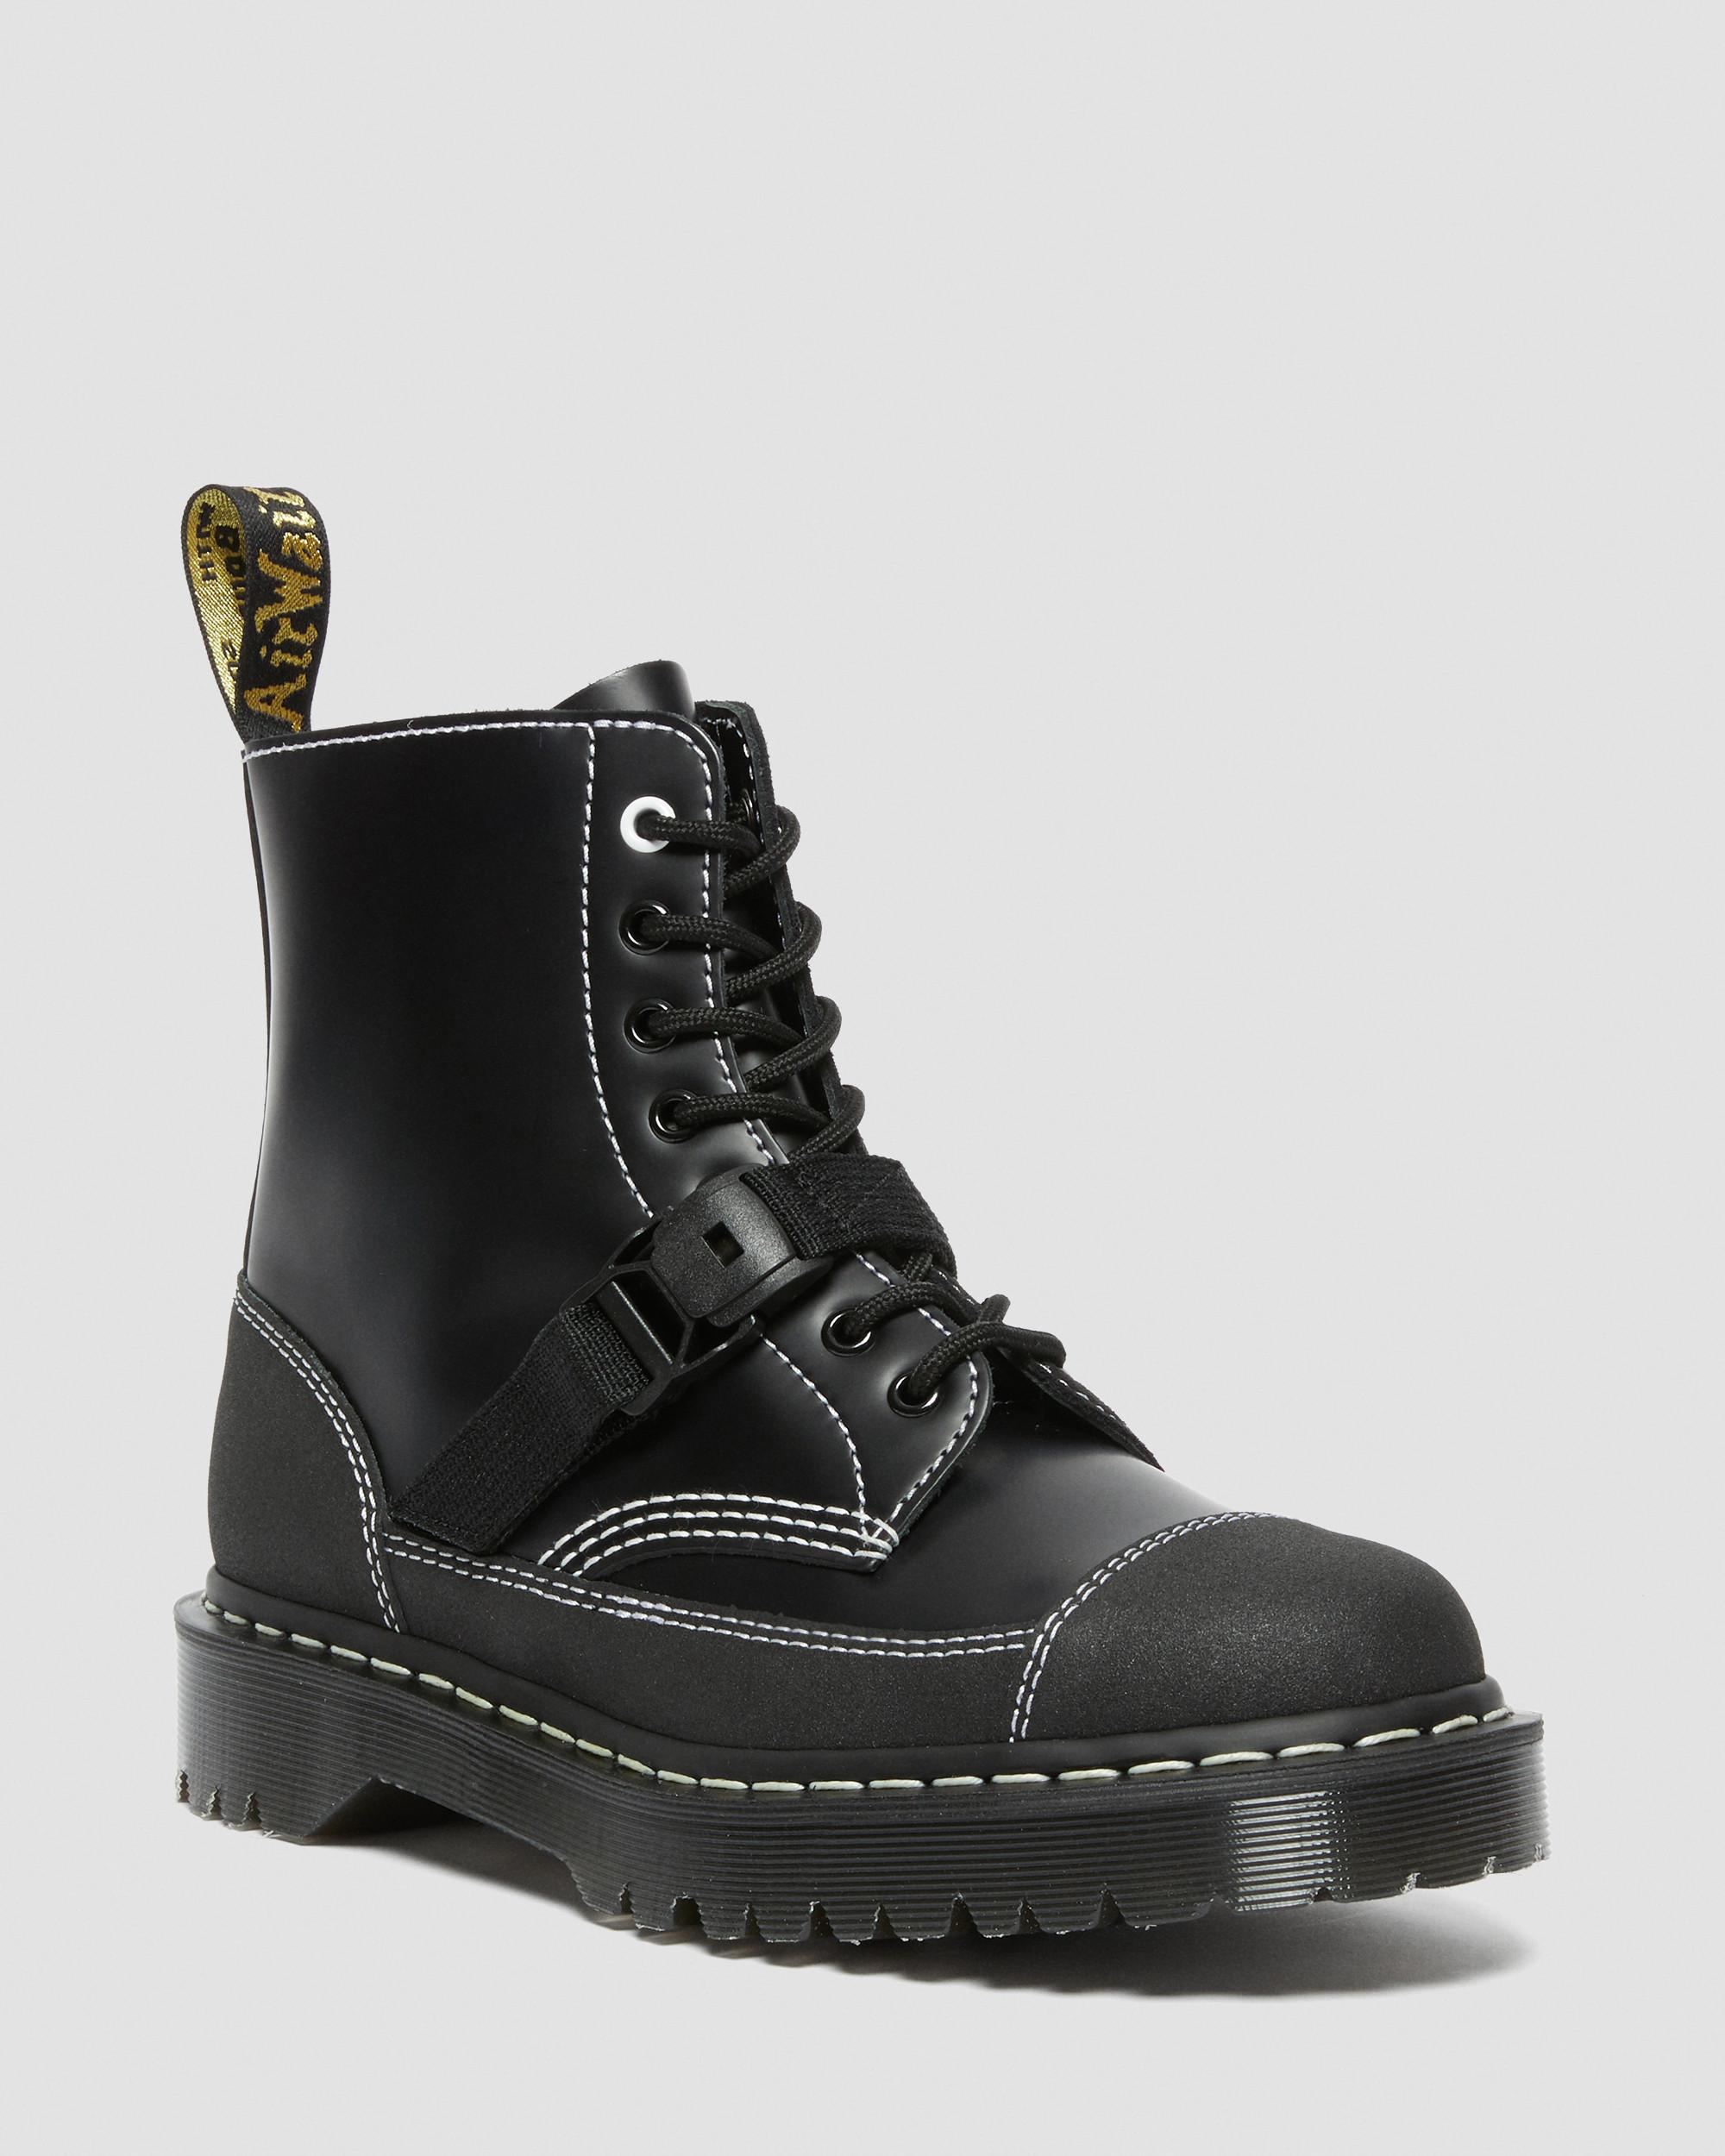 DR MARTENS 1460 Tech Made in England Leather Lace Up Boots